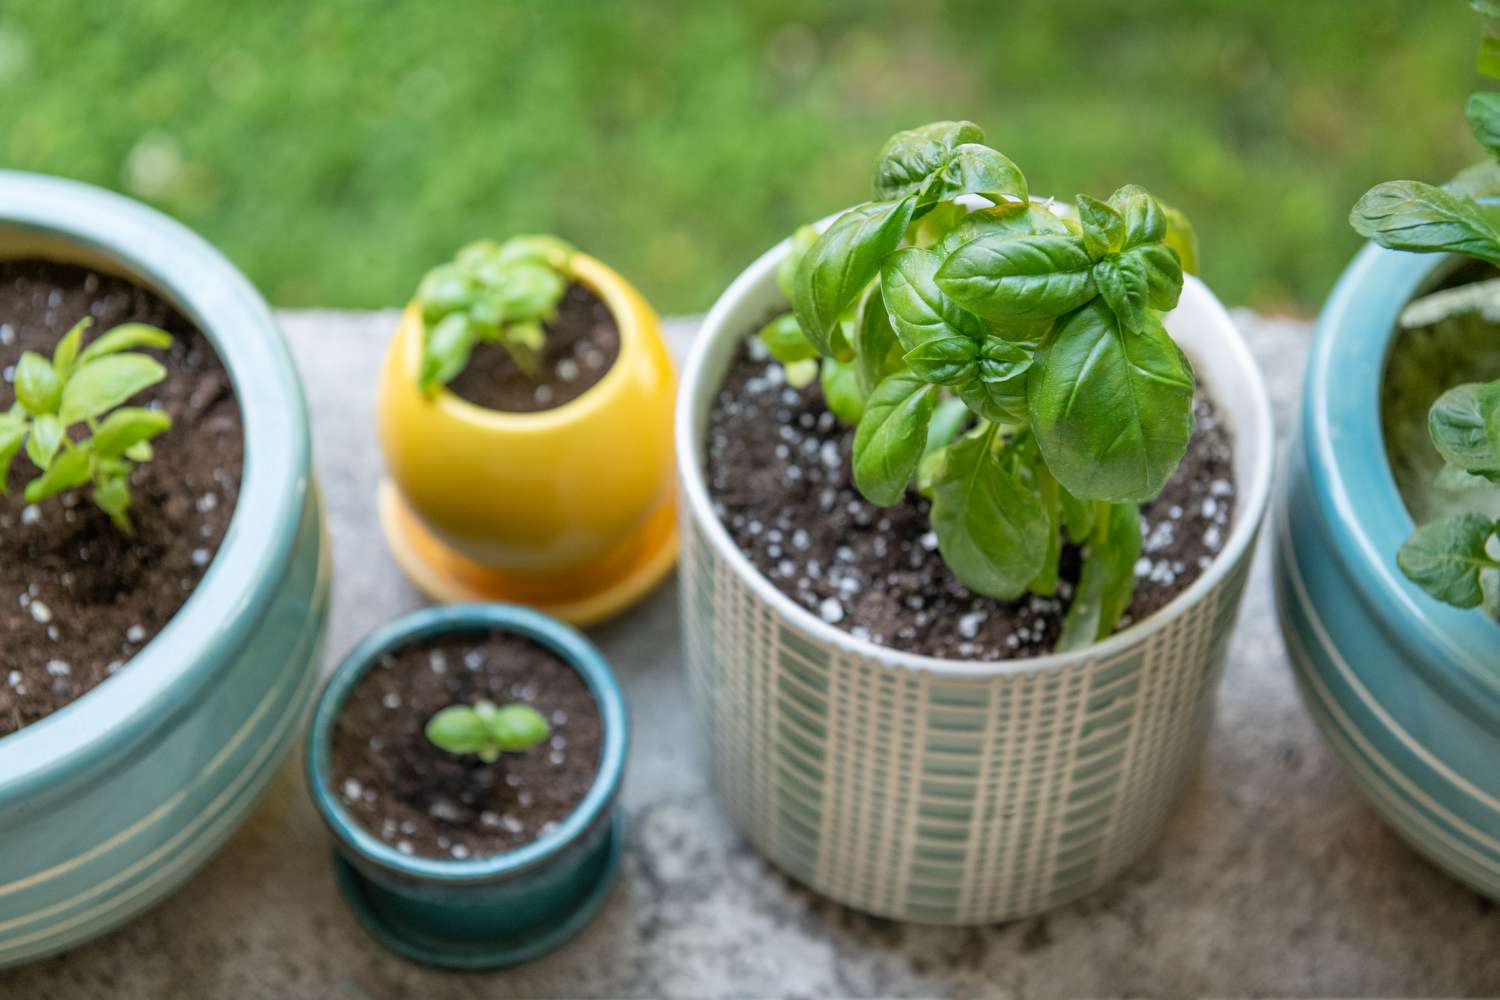 Where To Plant Basil